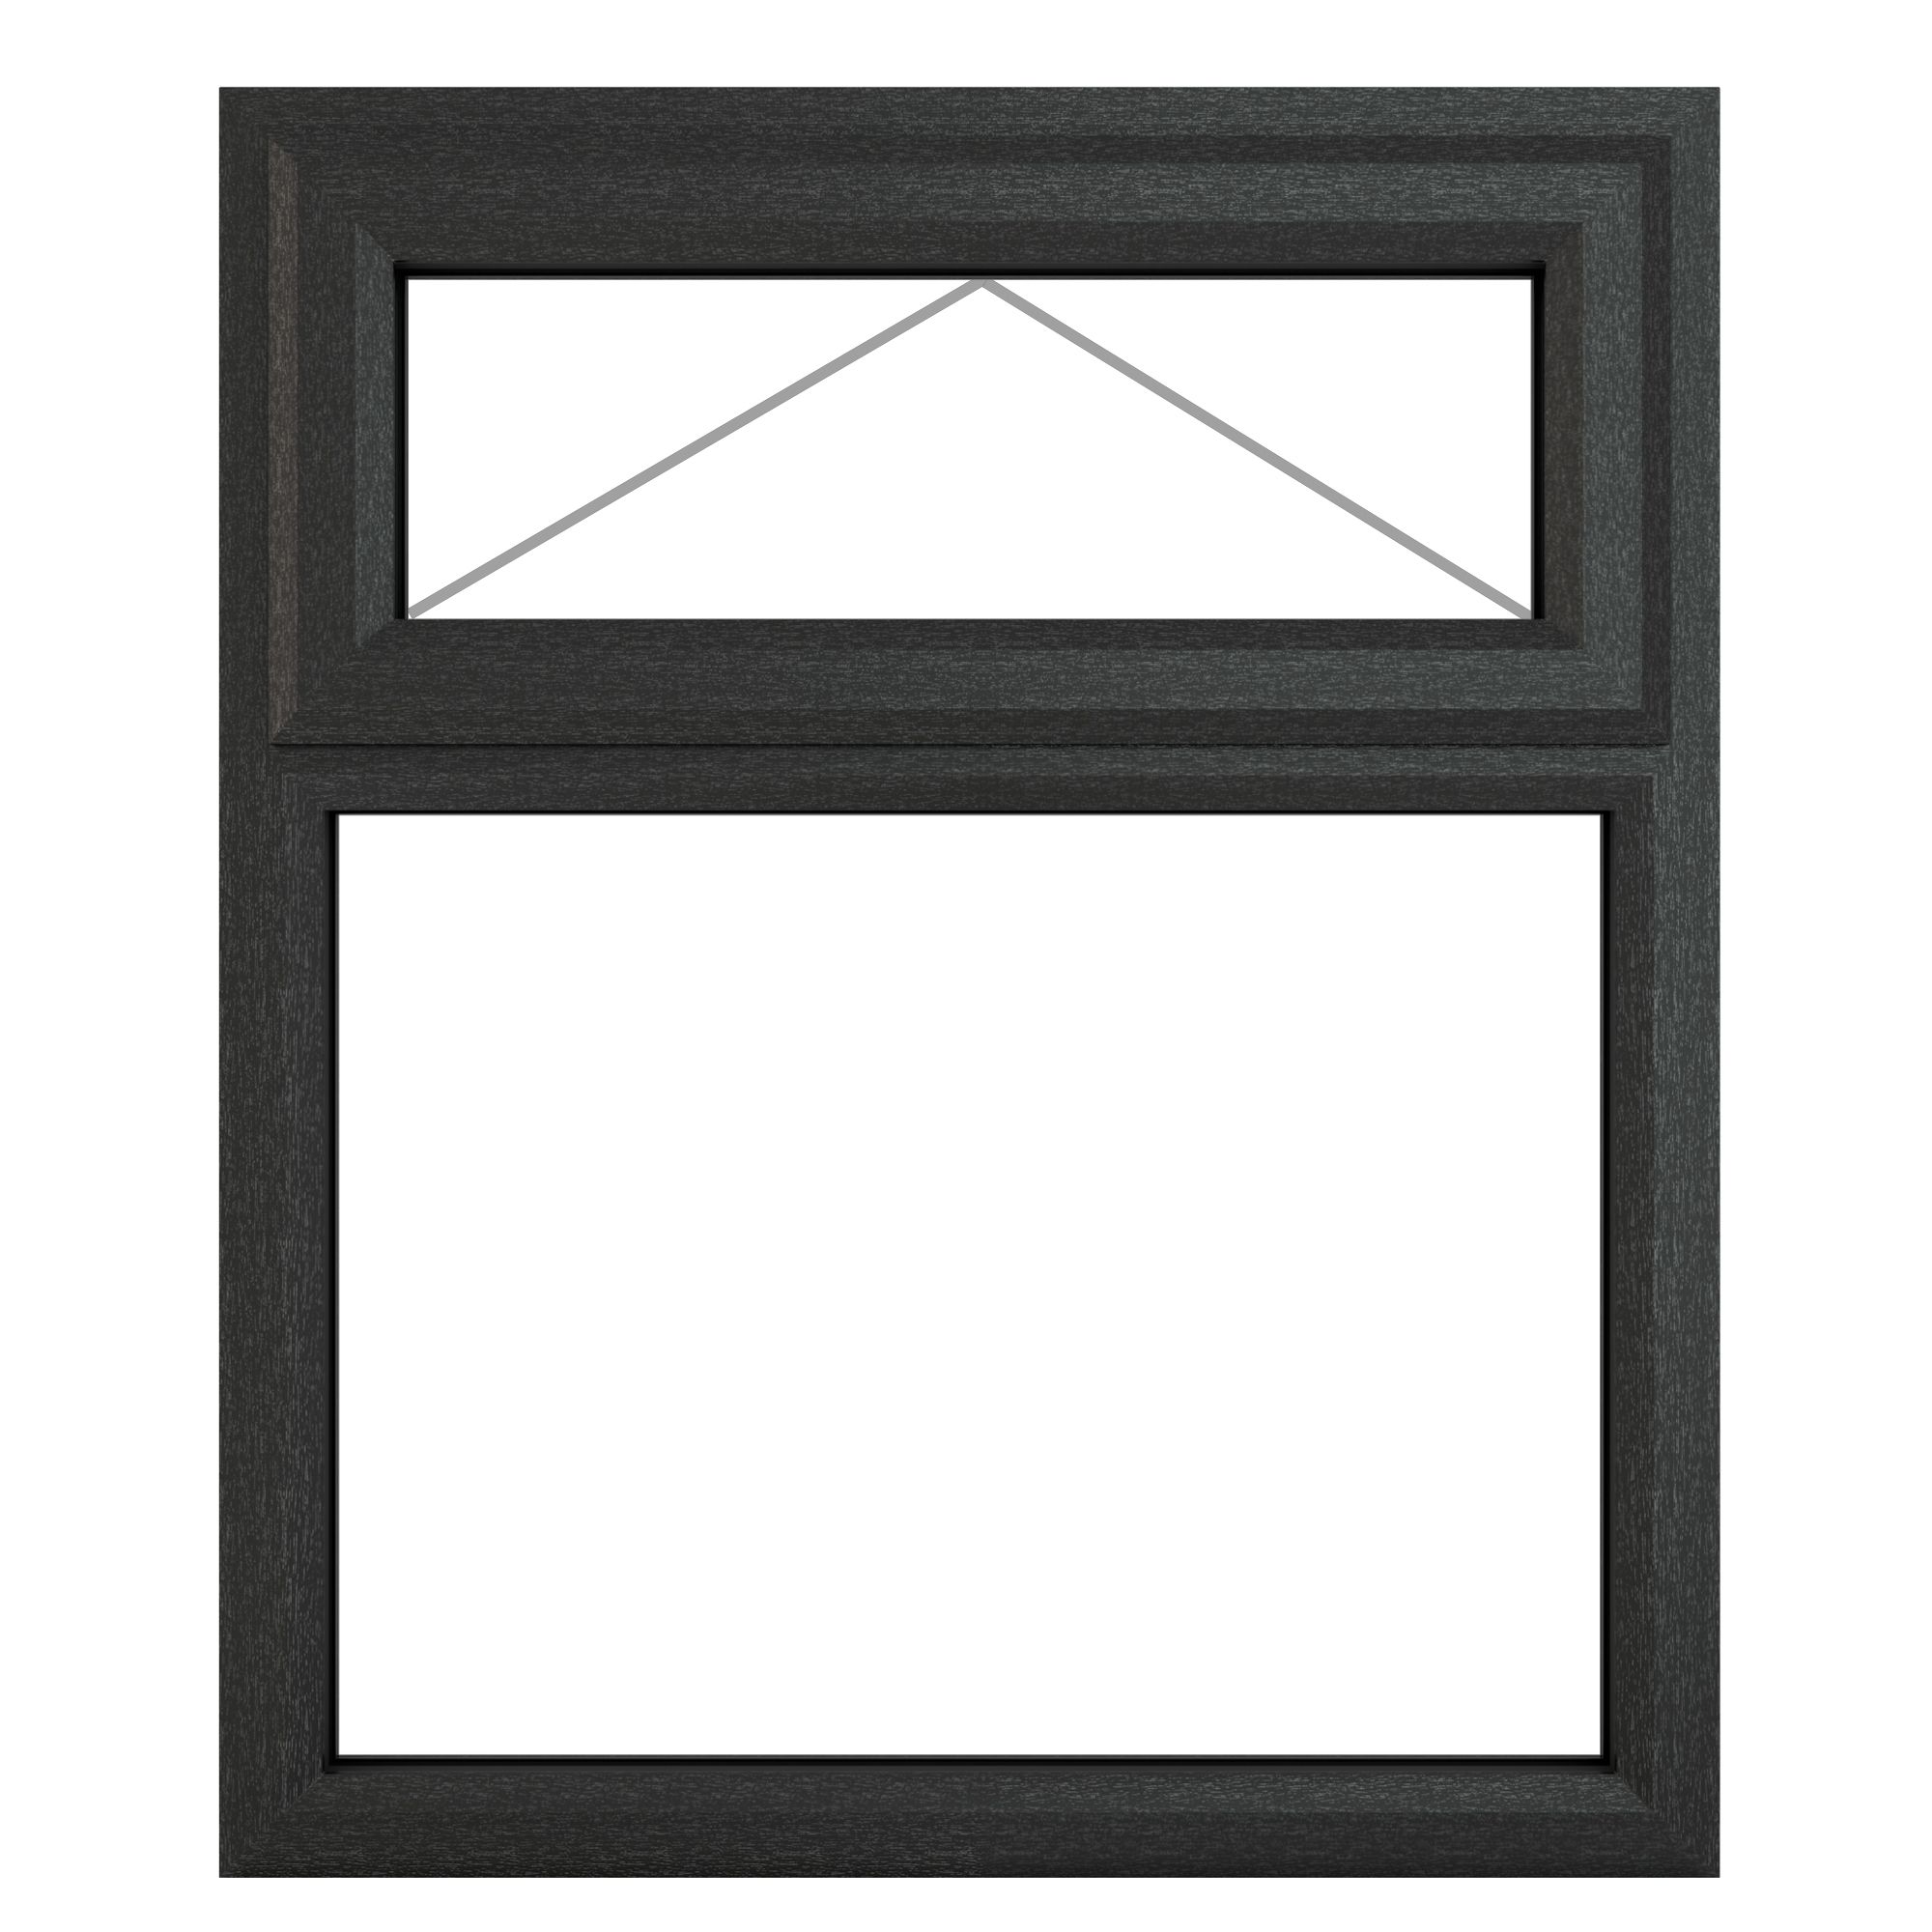 Fortia 2P Clear Glazed Anthracite uPVC Top hung Window, (H)1045mm (W)905mm